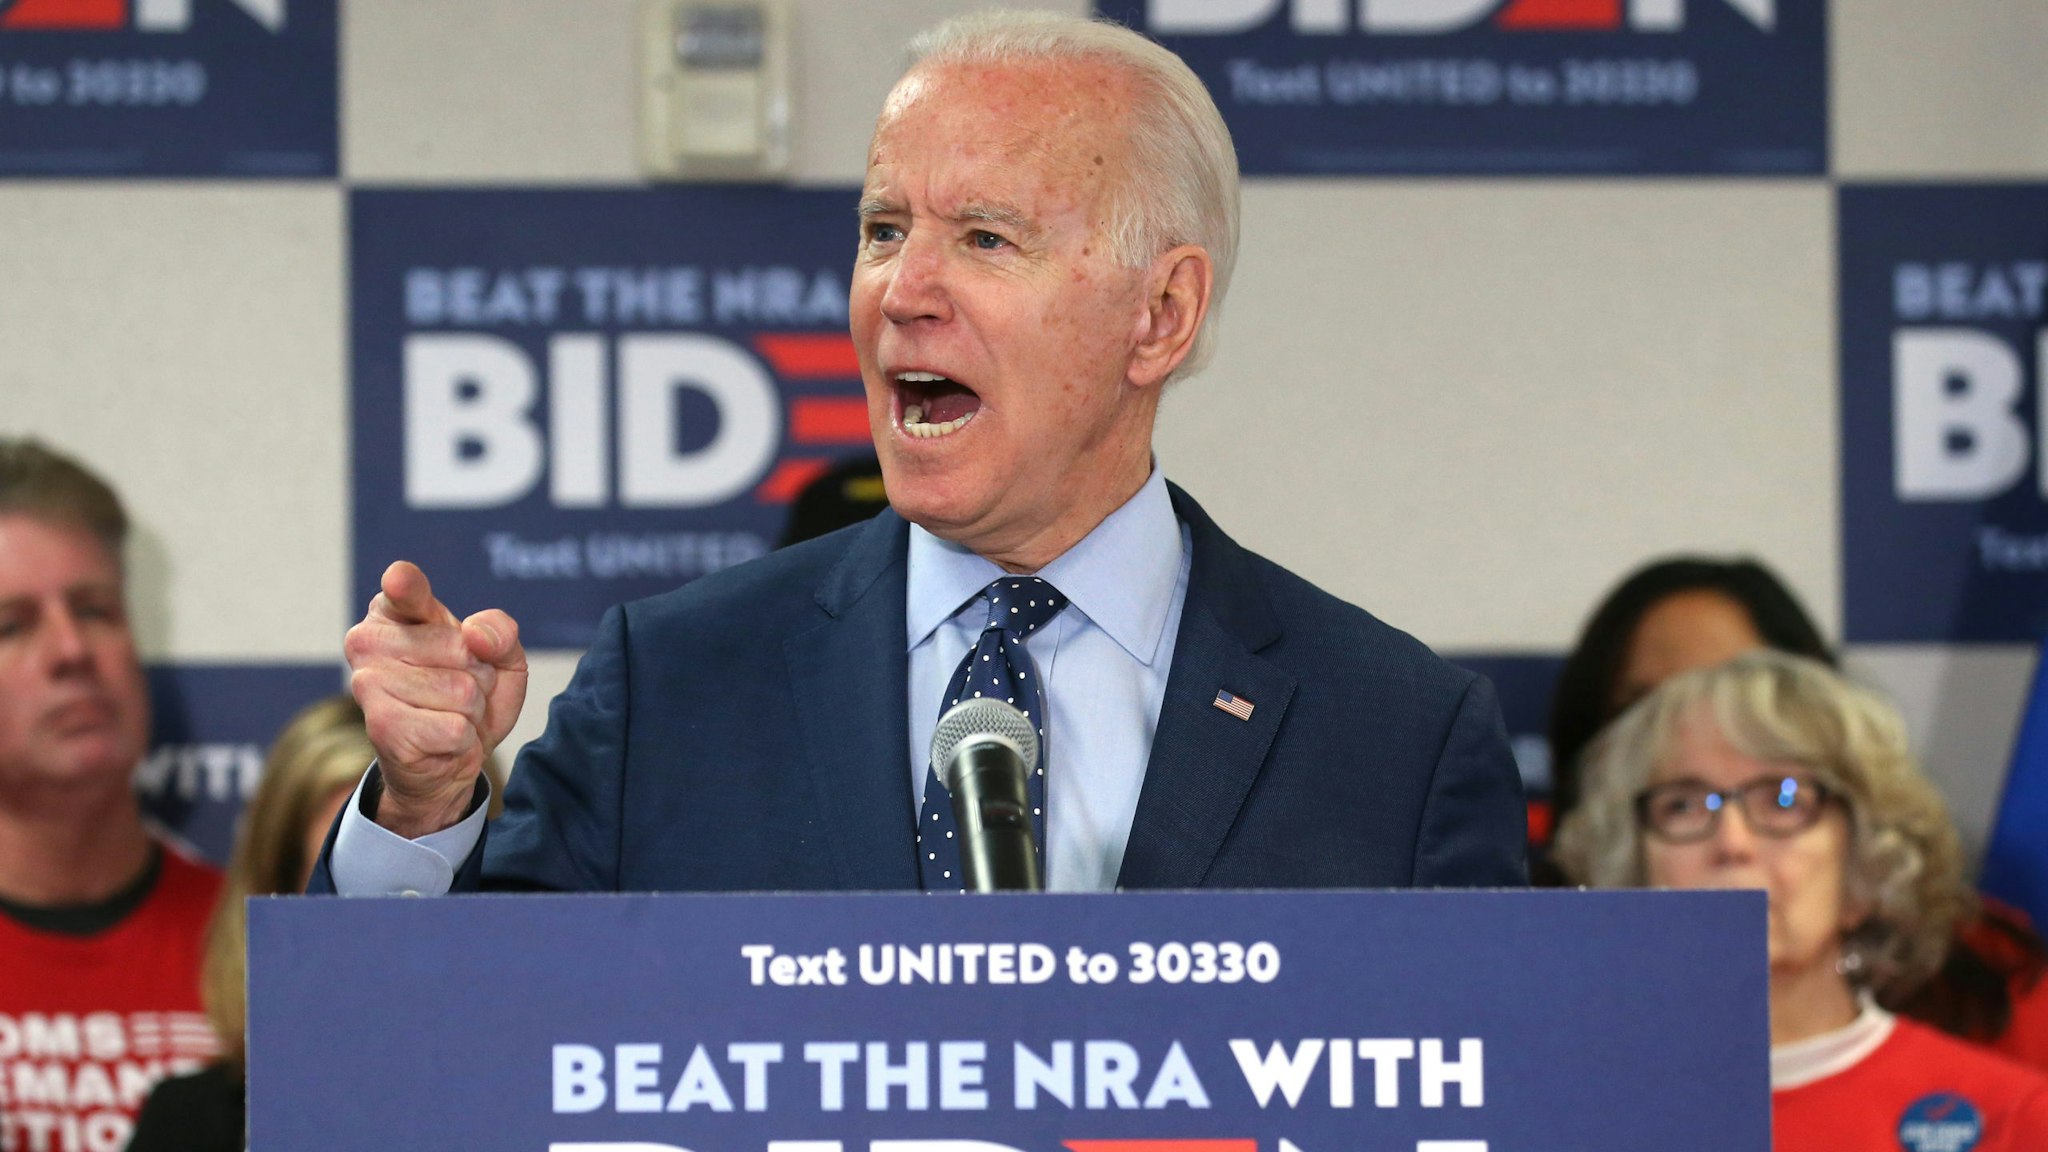 LAS VEGAS, NEVADA - FEBRUARY 20: Democratic presidential candidate former Vice President Joe Biden speaks about his plan to curb gun violence on February 20, 2020 in Las Vegas, Nevada. Biden was joined by gun violence survivors and activists. The upcoming Nevada Democratic presidential caucus will be held February 22.